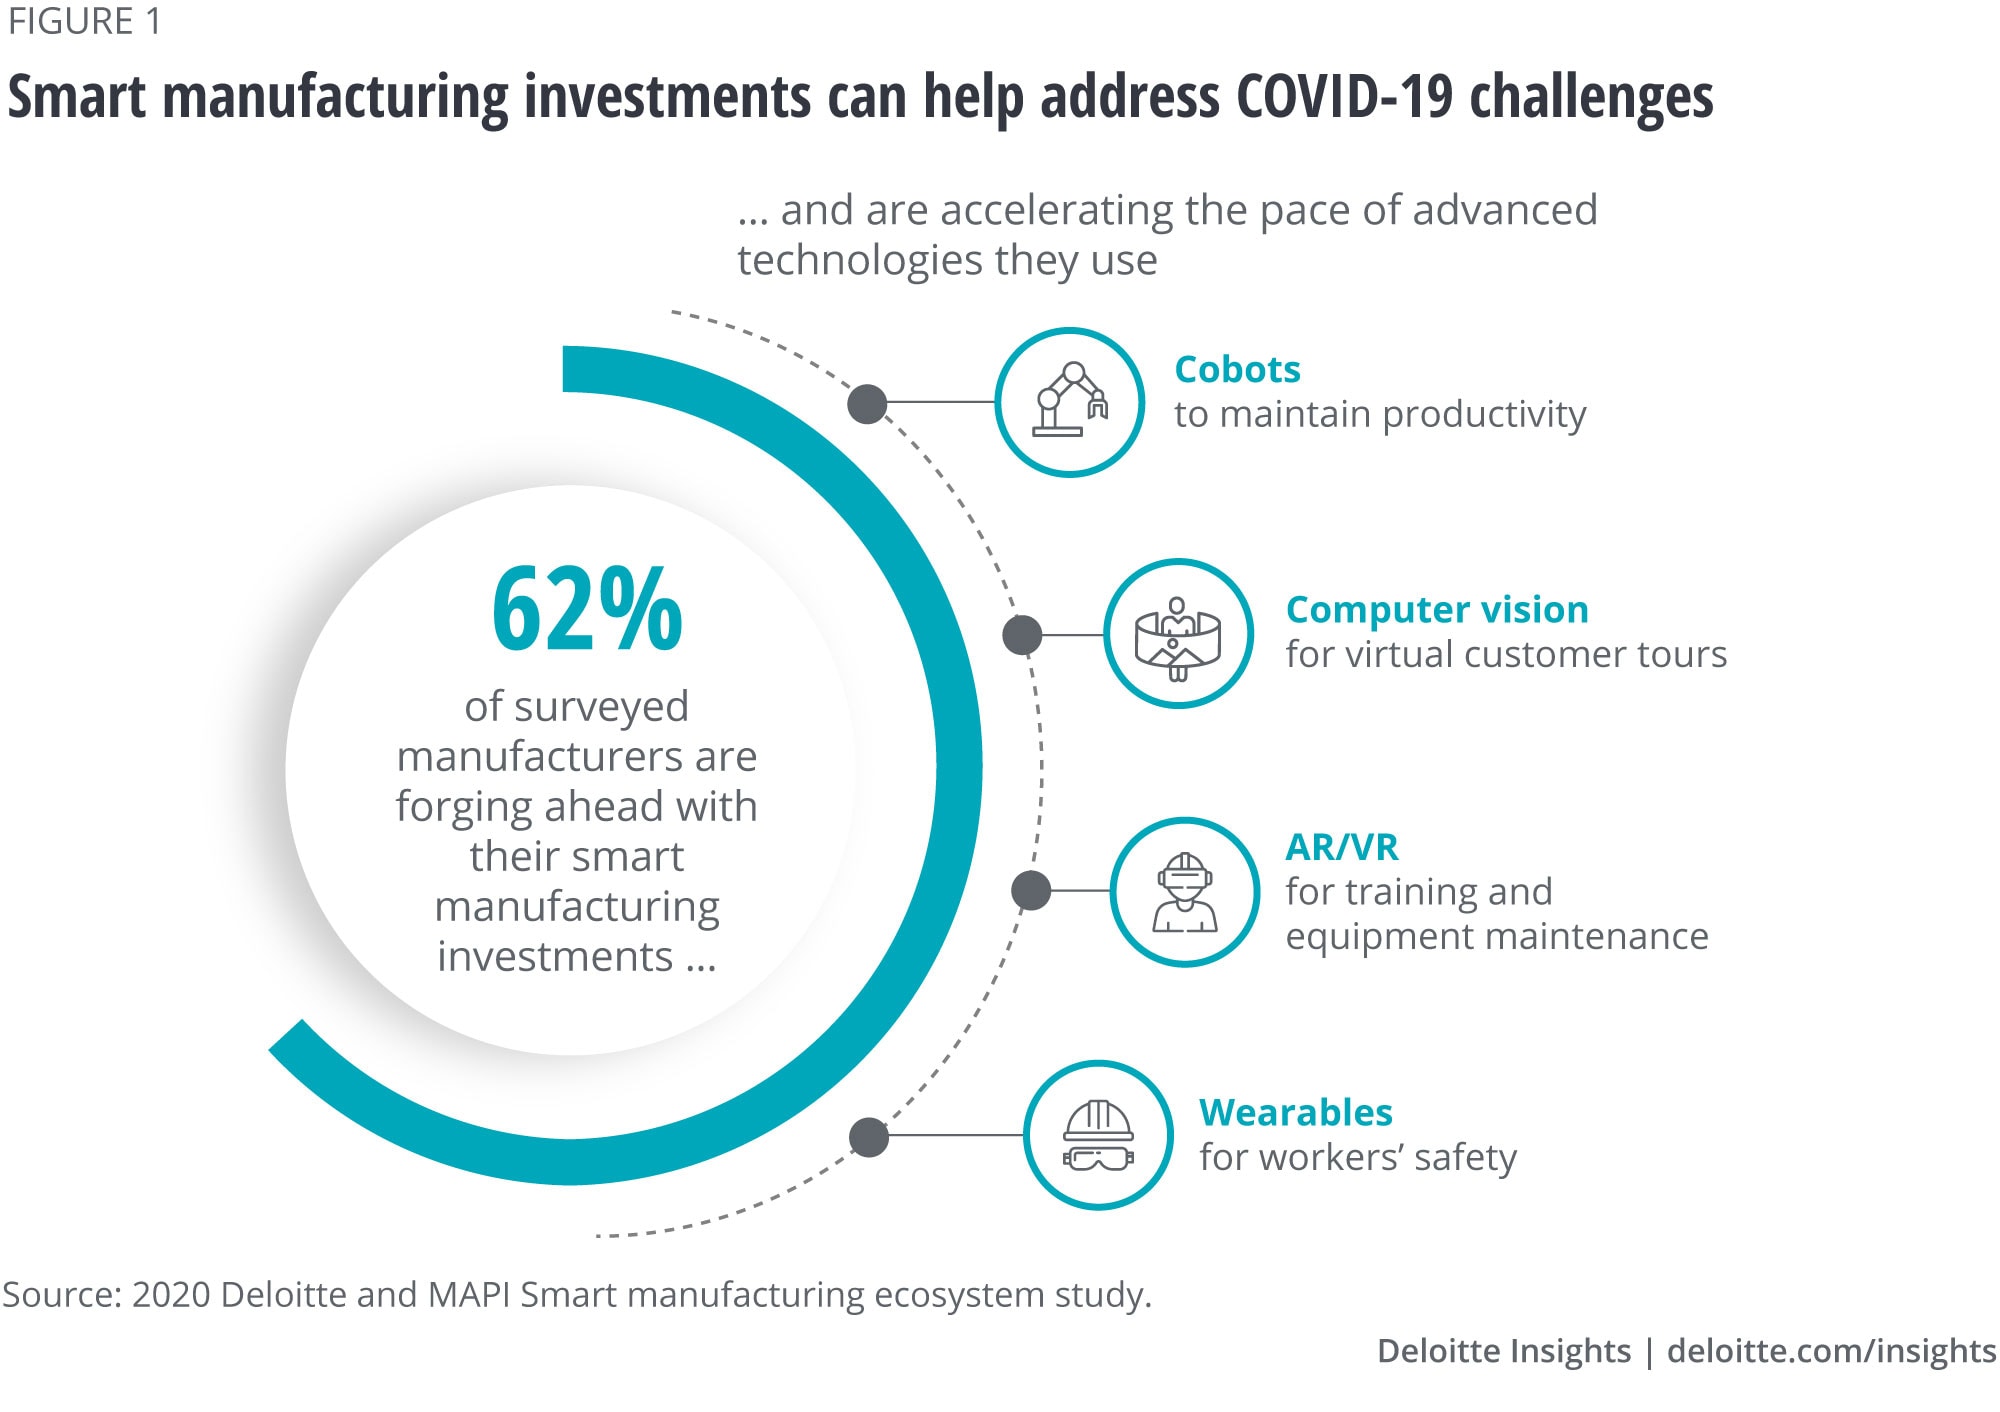 Smart manufacturing investments can help address COVID-19 challenges